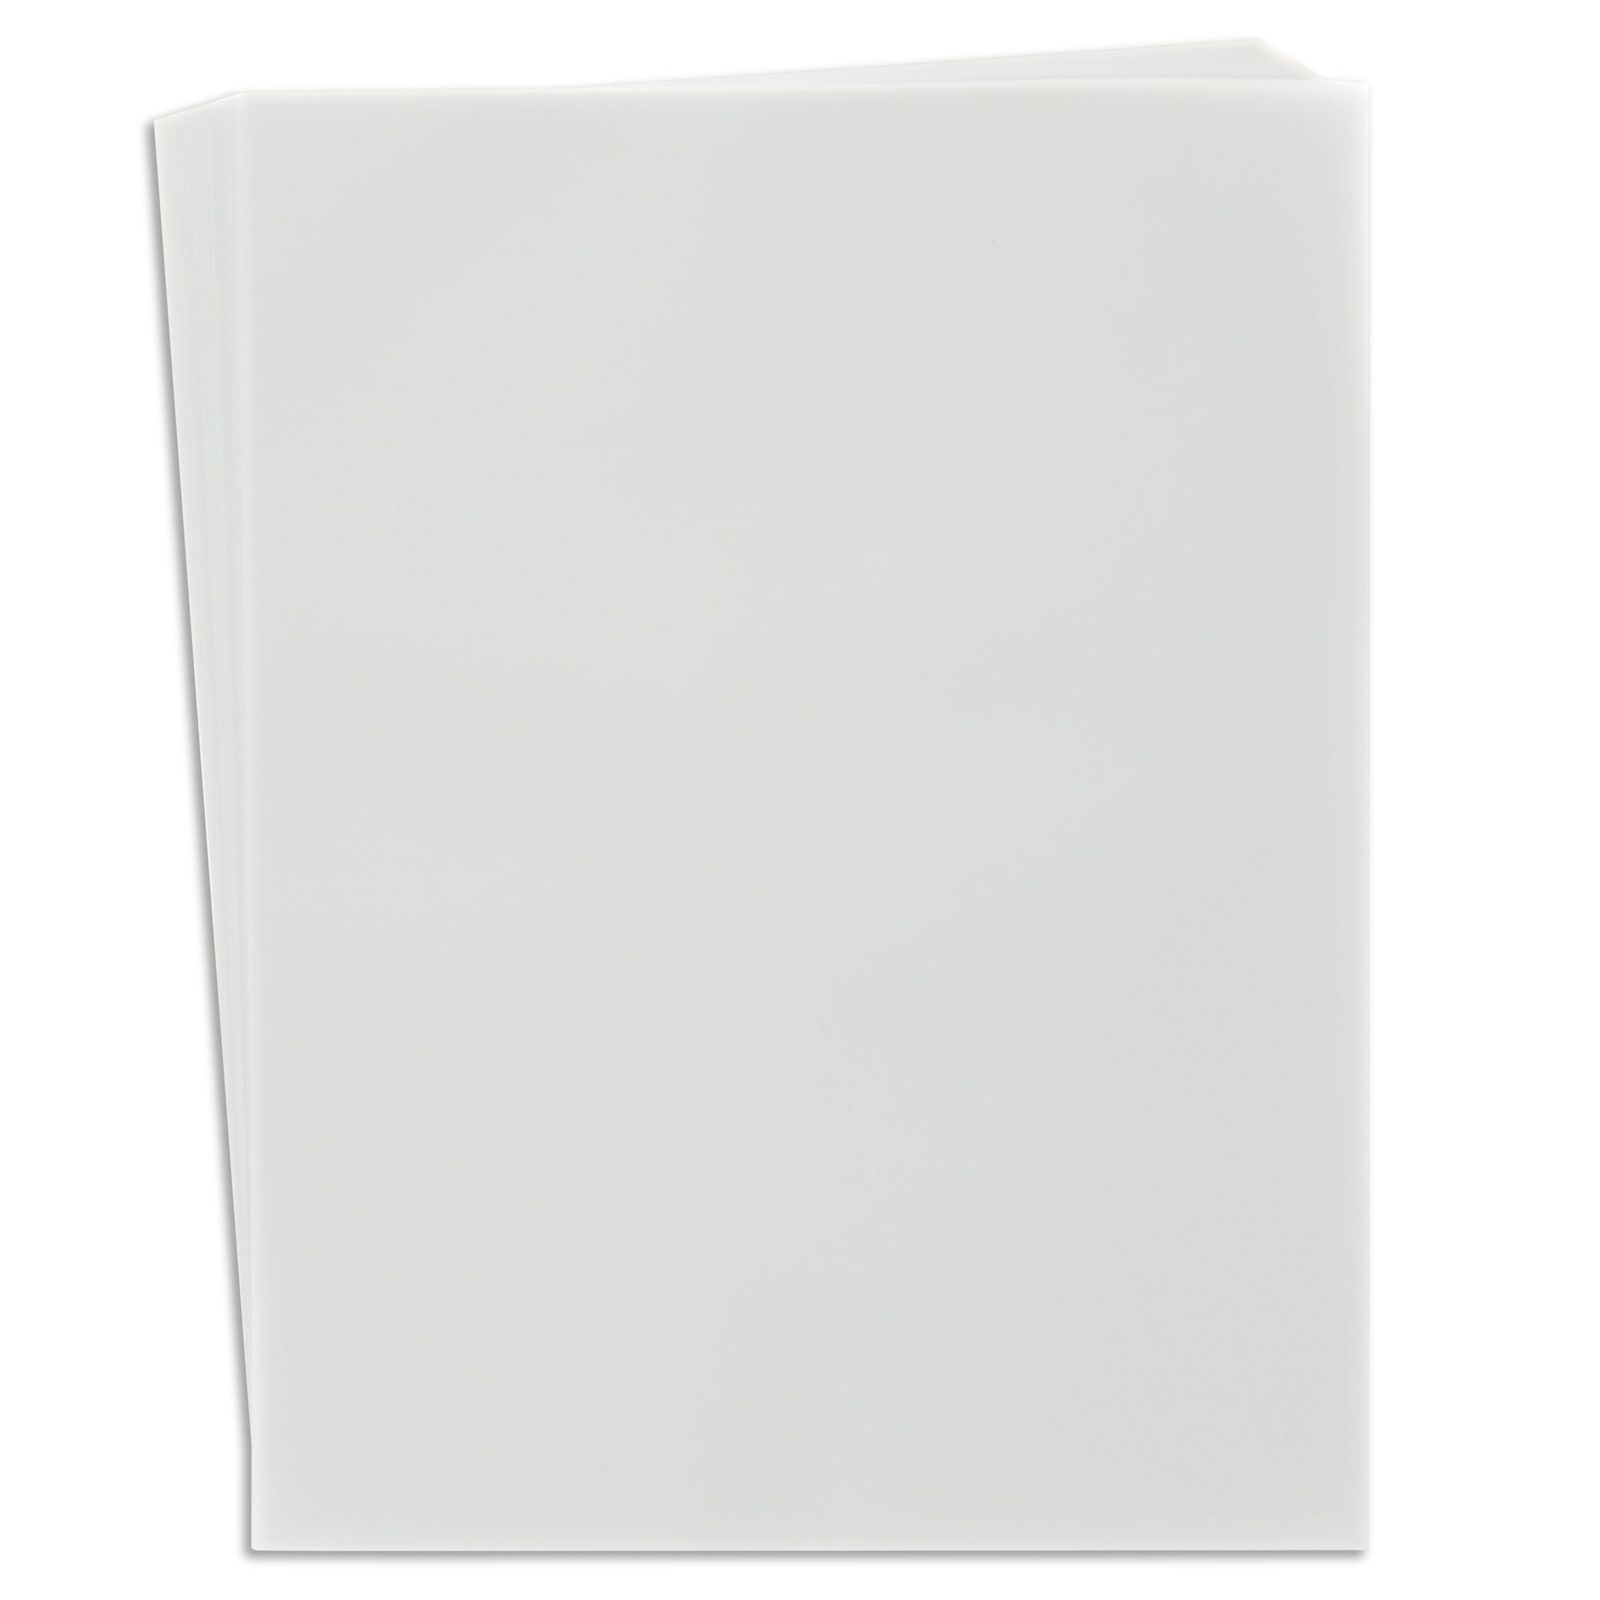 100 Sheets Pack Vellum Paper - White Translucent Sketching Paper - 8.5 x 11